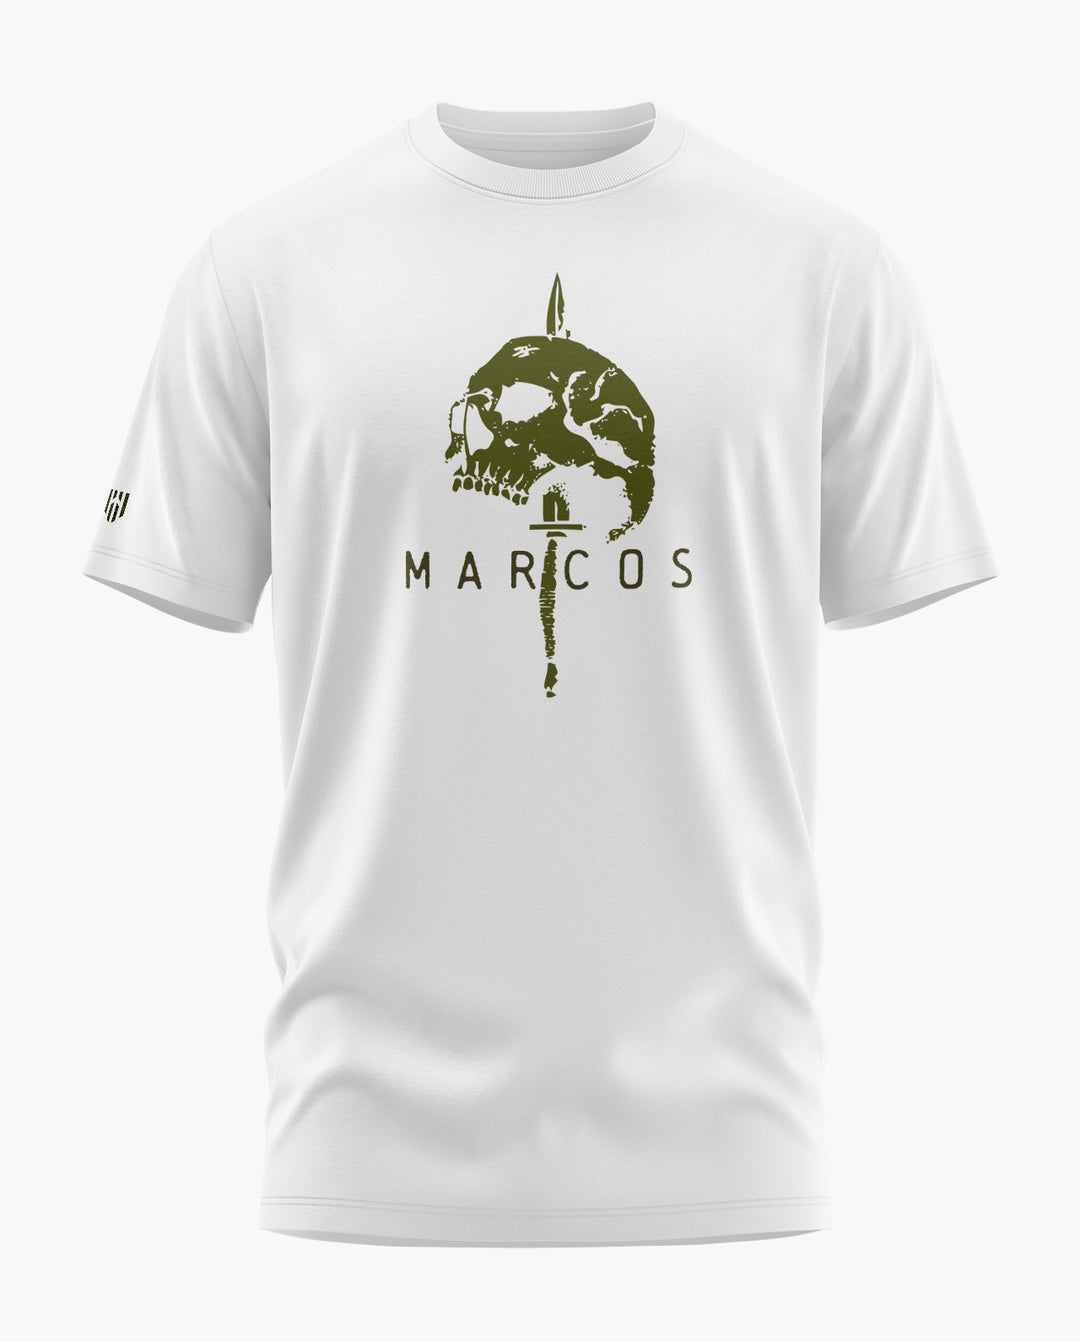 MARCOS SUPREMACY T-Shirt